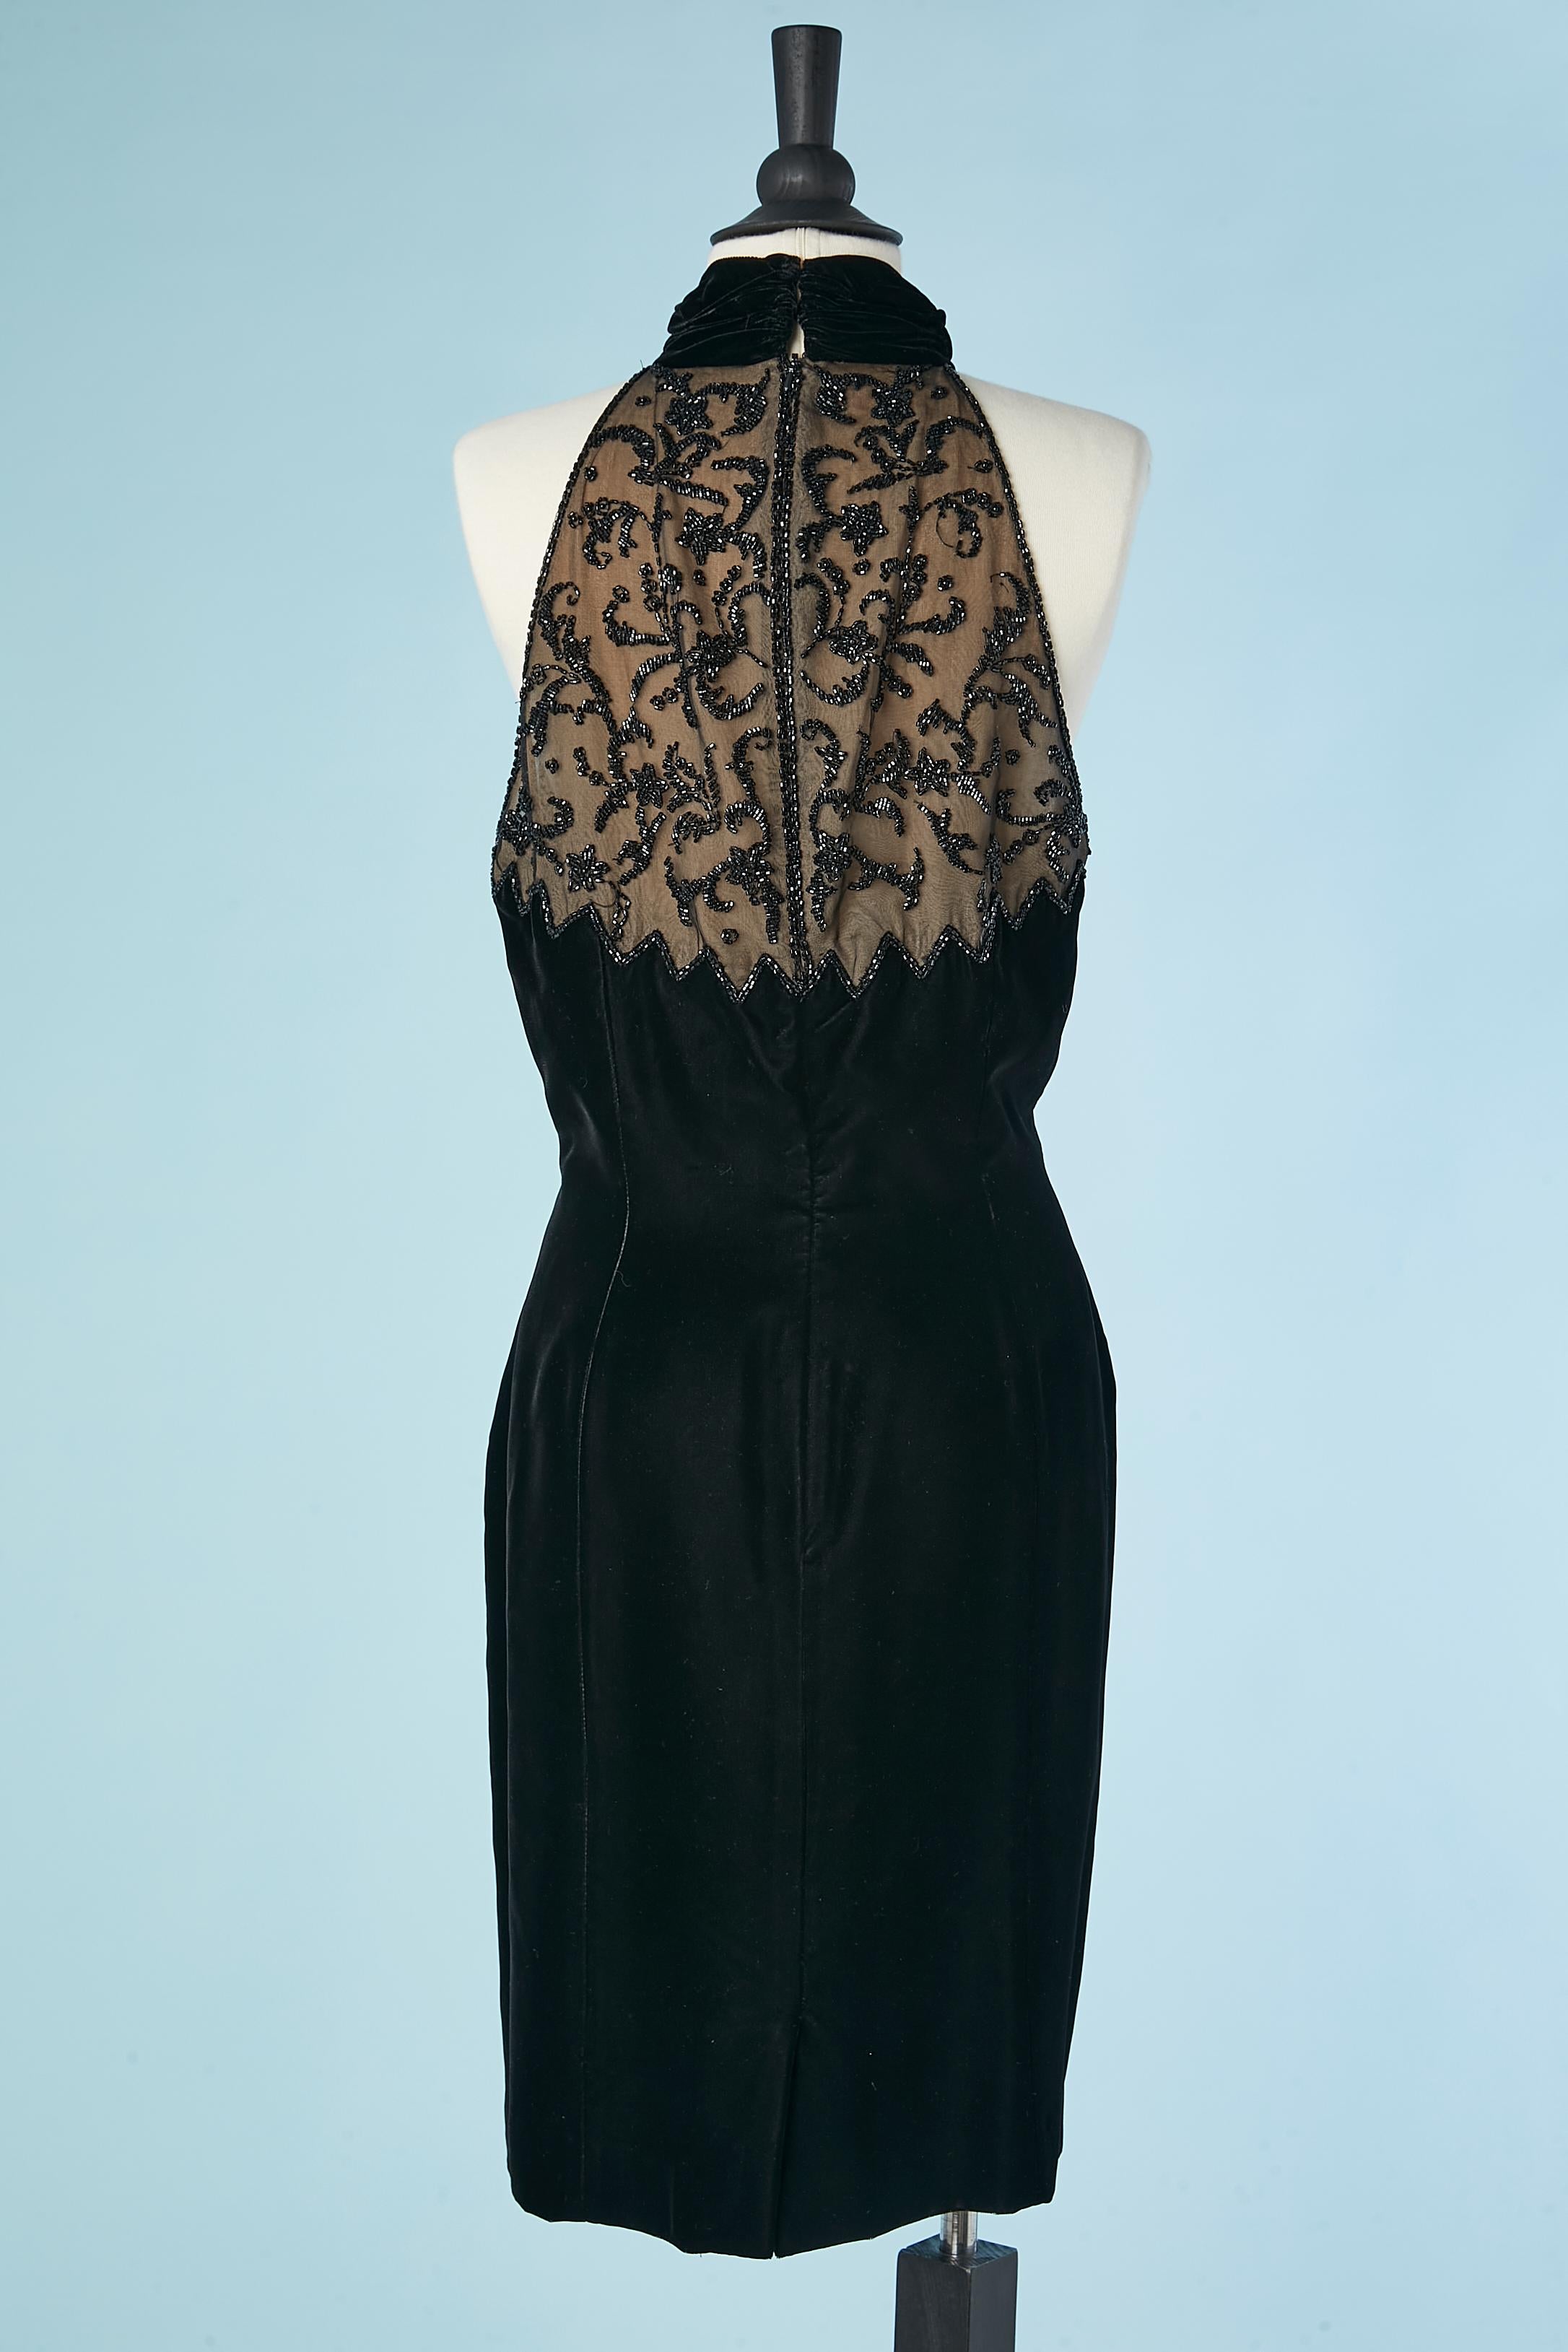 Boléro and cocktail dress with embroidery beaded back Black Tie by Oleg Cassini 1